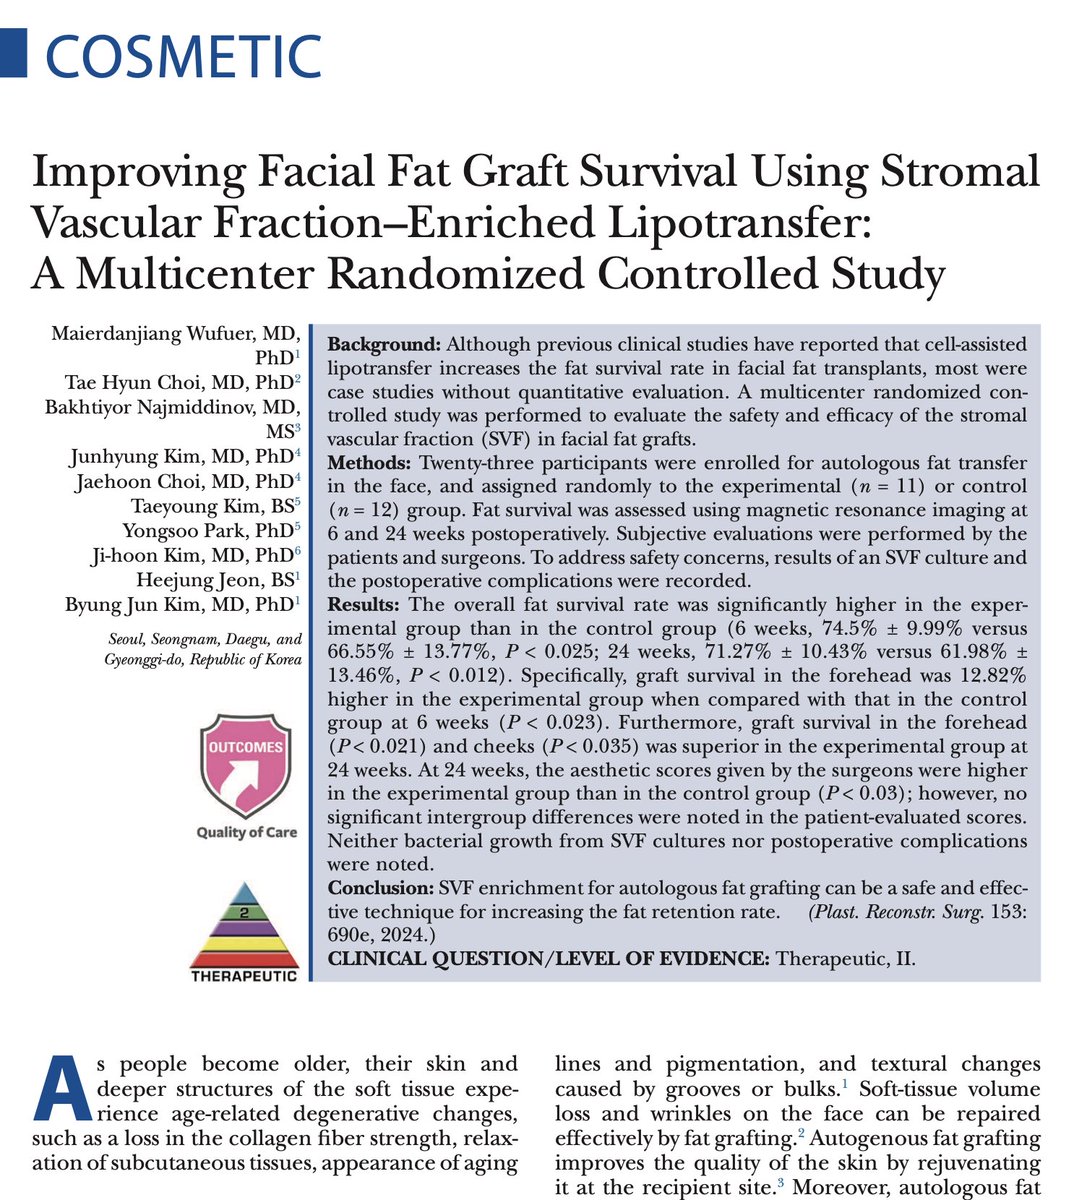 In a clinical trial of facial fat transplant, fat grafting augmented with stromal vascular fraction was shown to have greater retention and no adverse events. Translation from animal studies to human application. #PlasticSurgery @PRSJournal bit.ly/3TFevu3